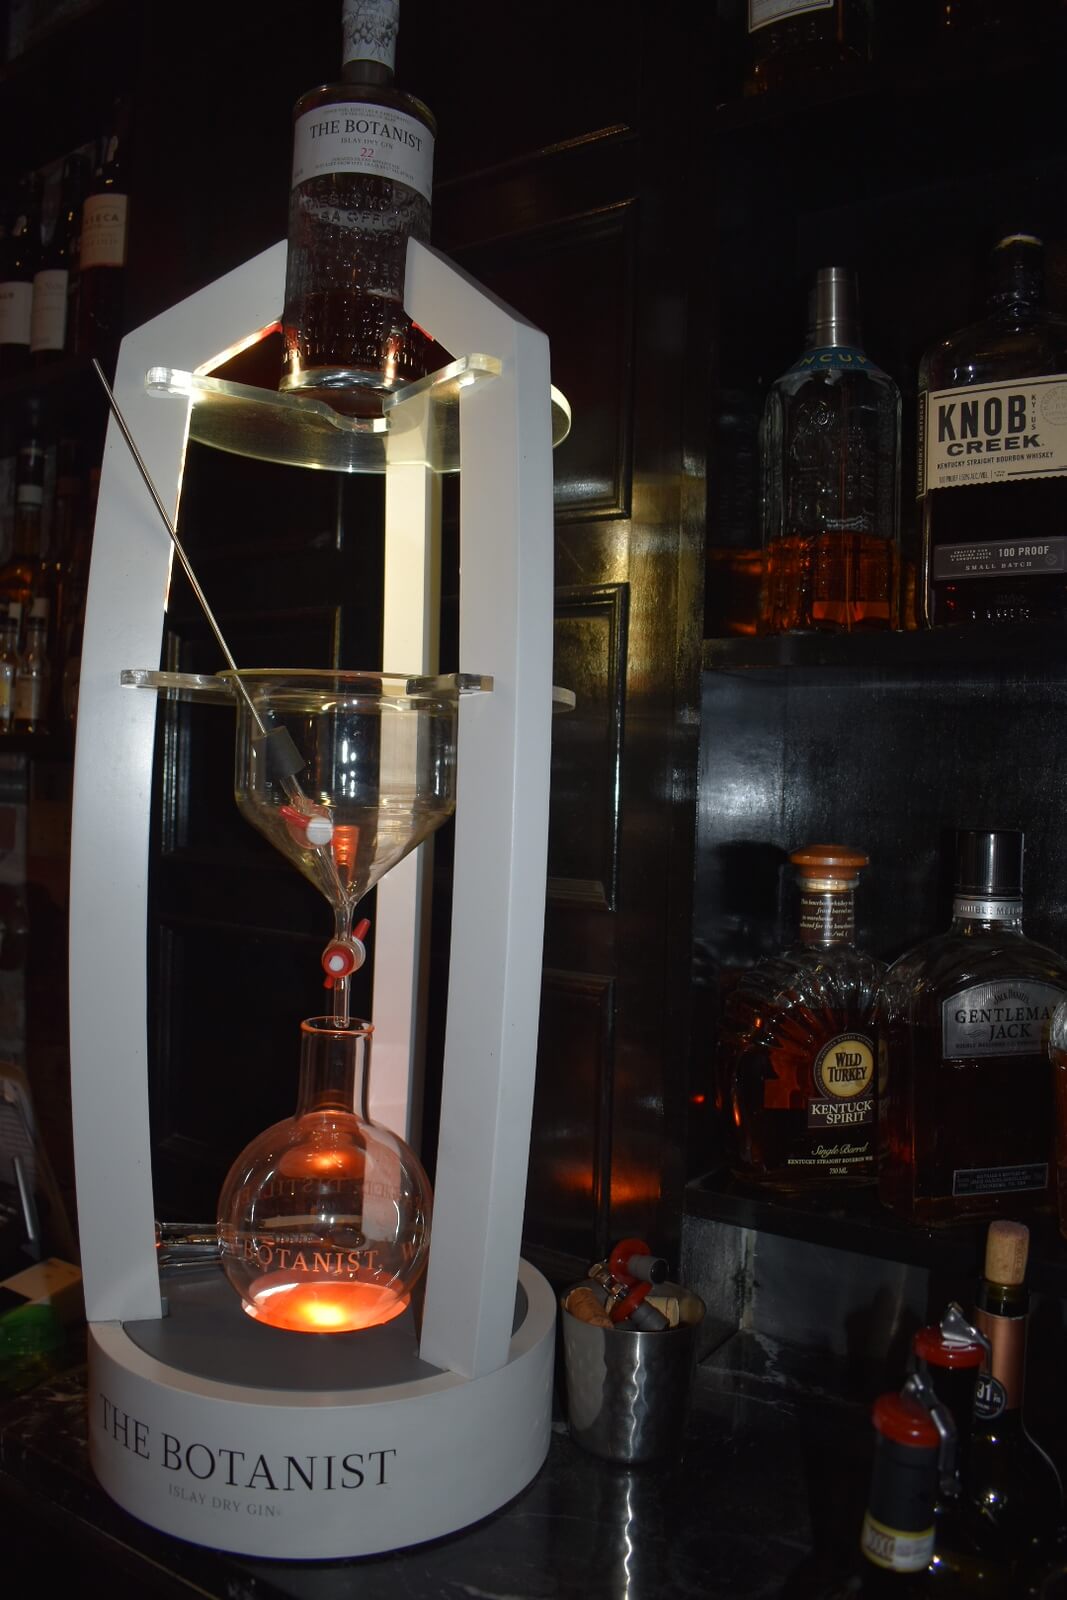 The Botanist Gin being poured through their unique display